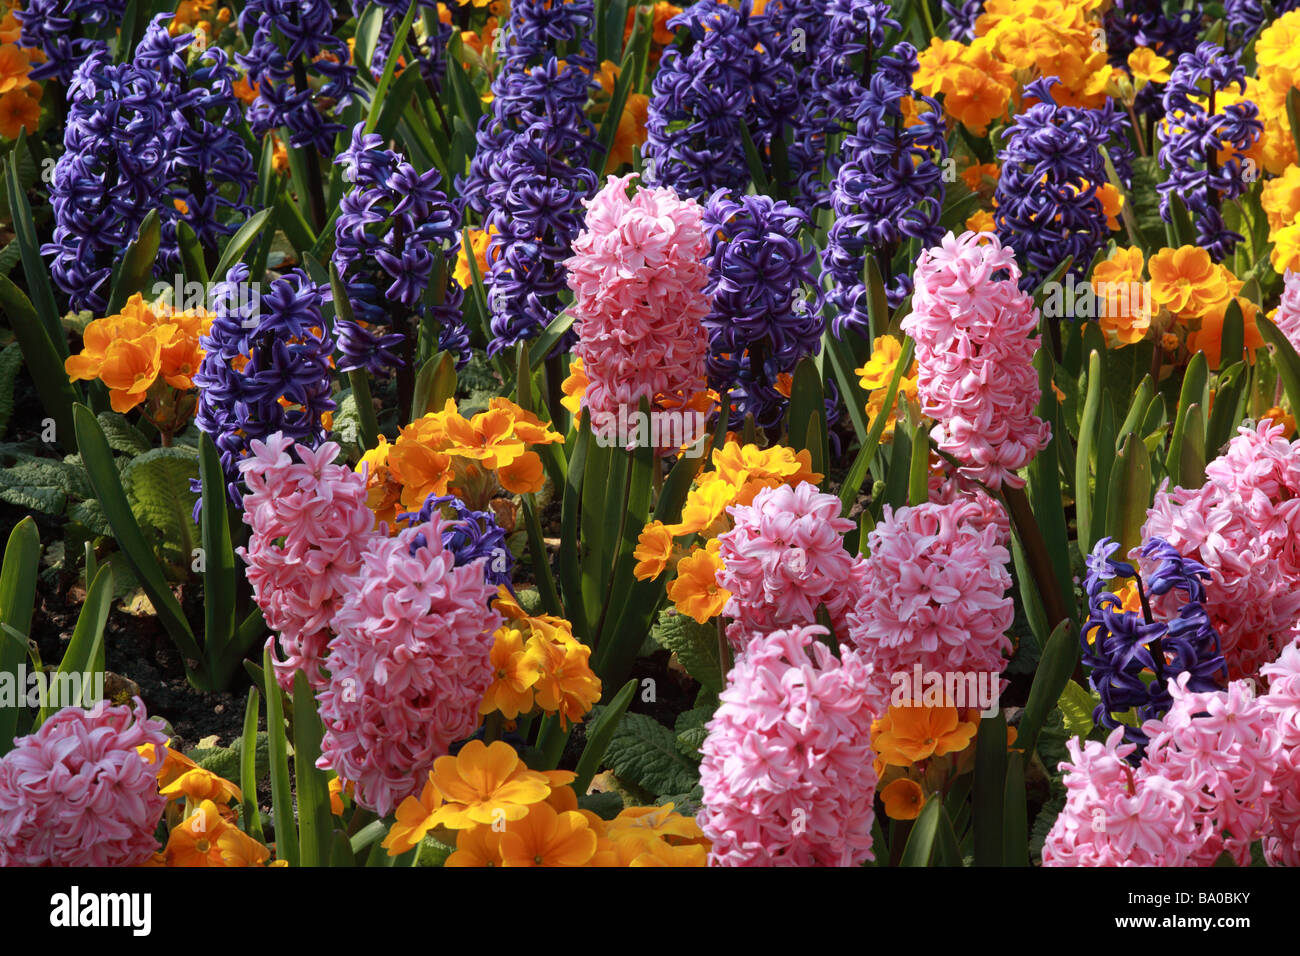 Planted Display Of Brightly Coloured Spring Flowers Hyacinth Primulas In An English Spring Garden Border Uk Stock Photo Alamy